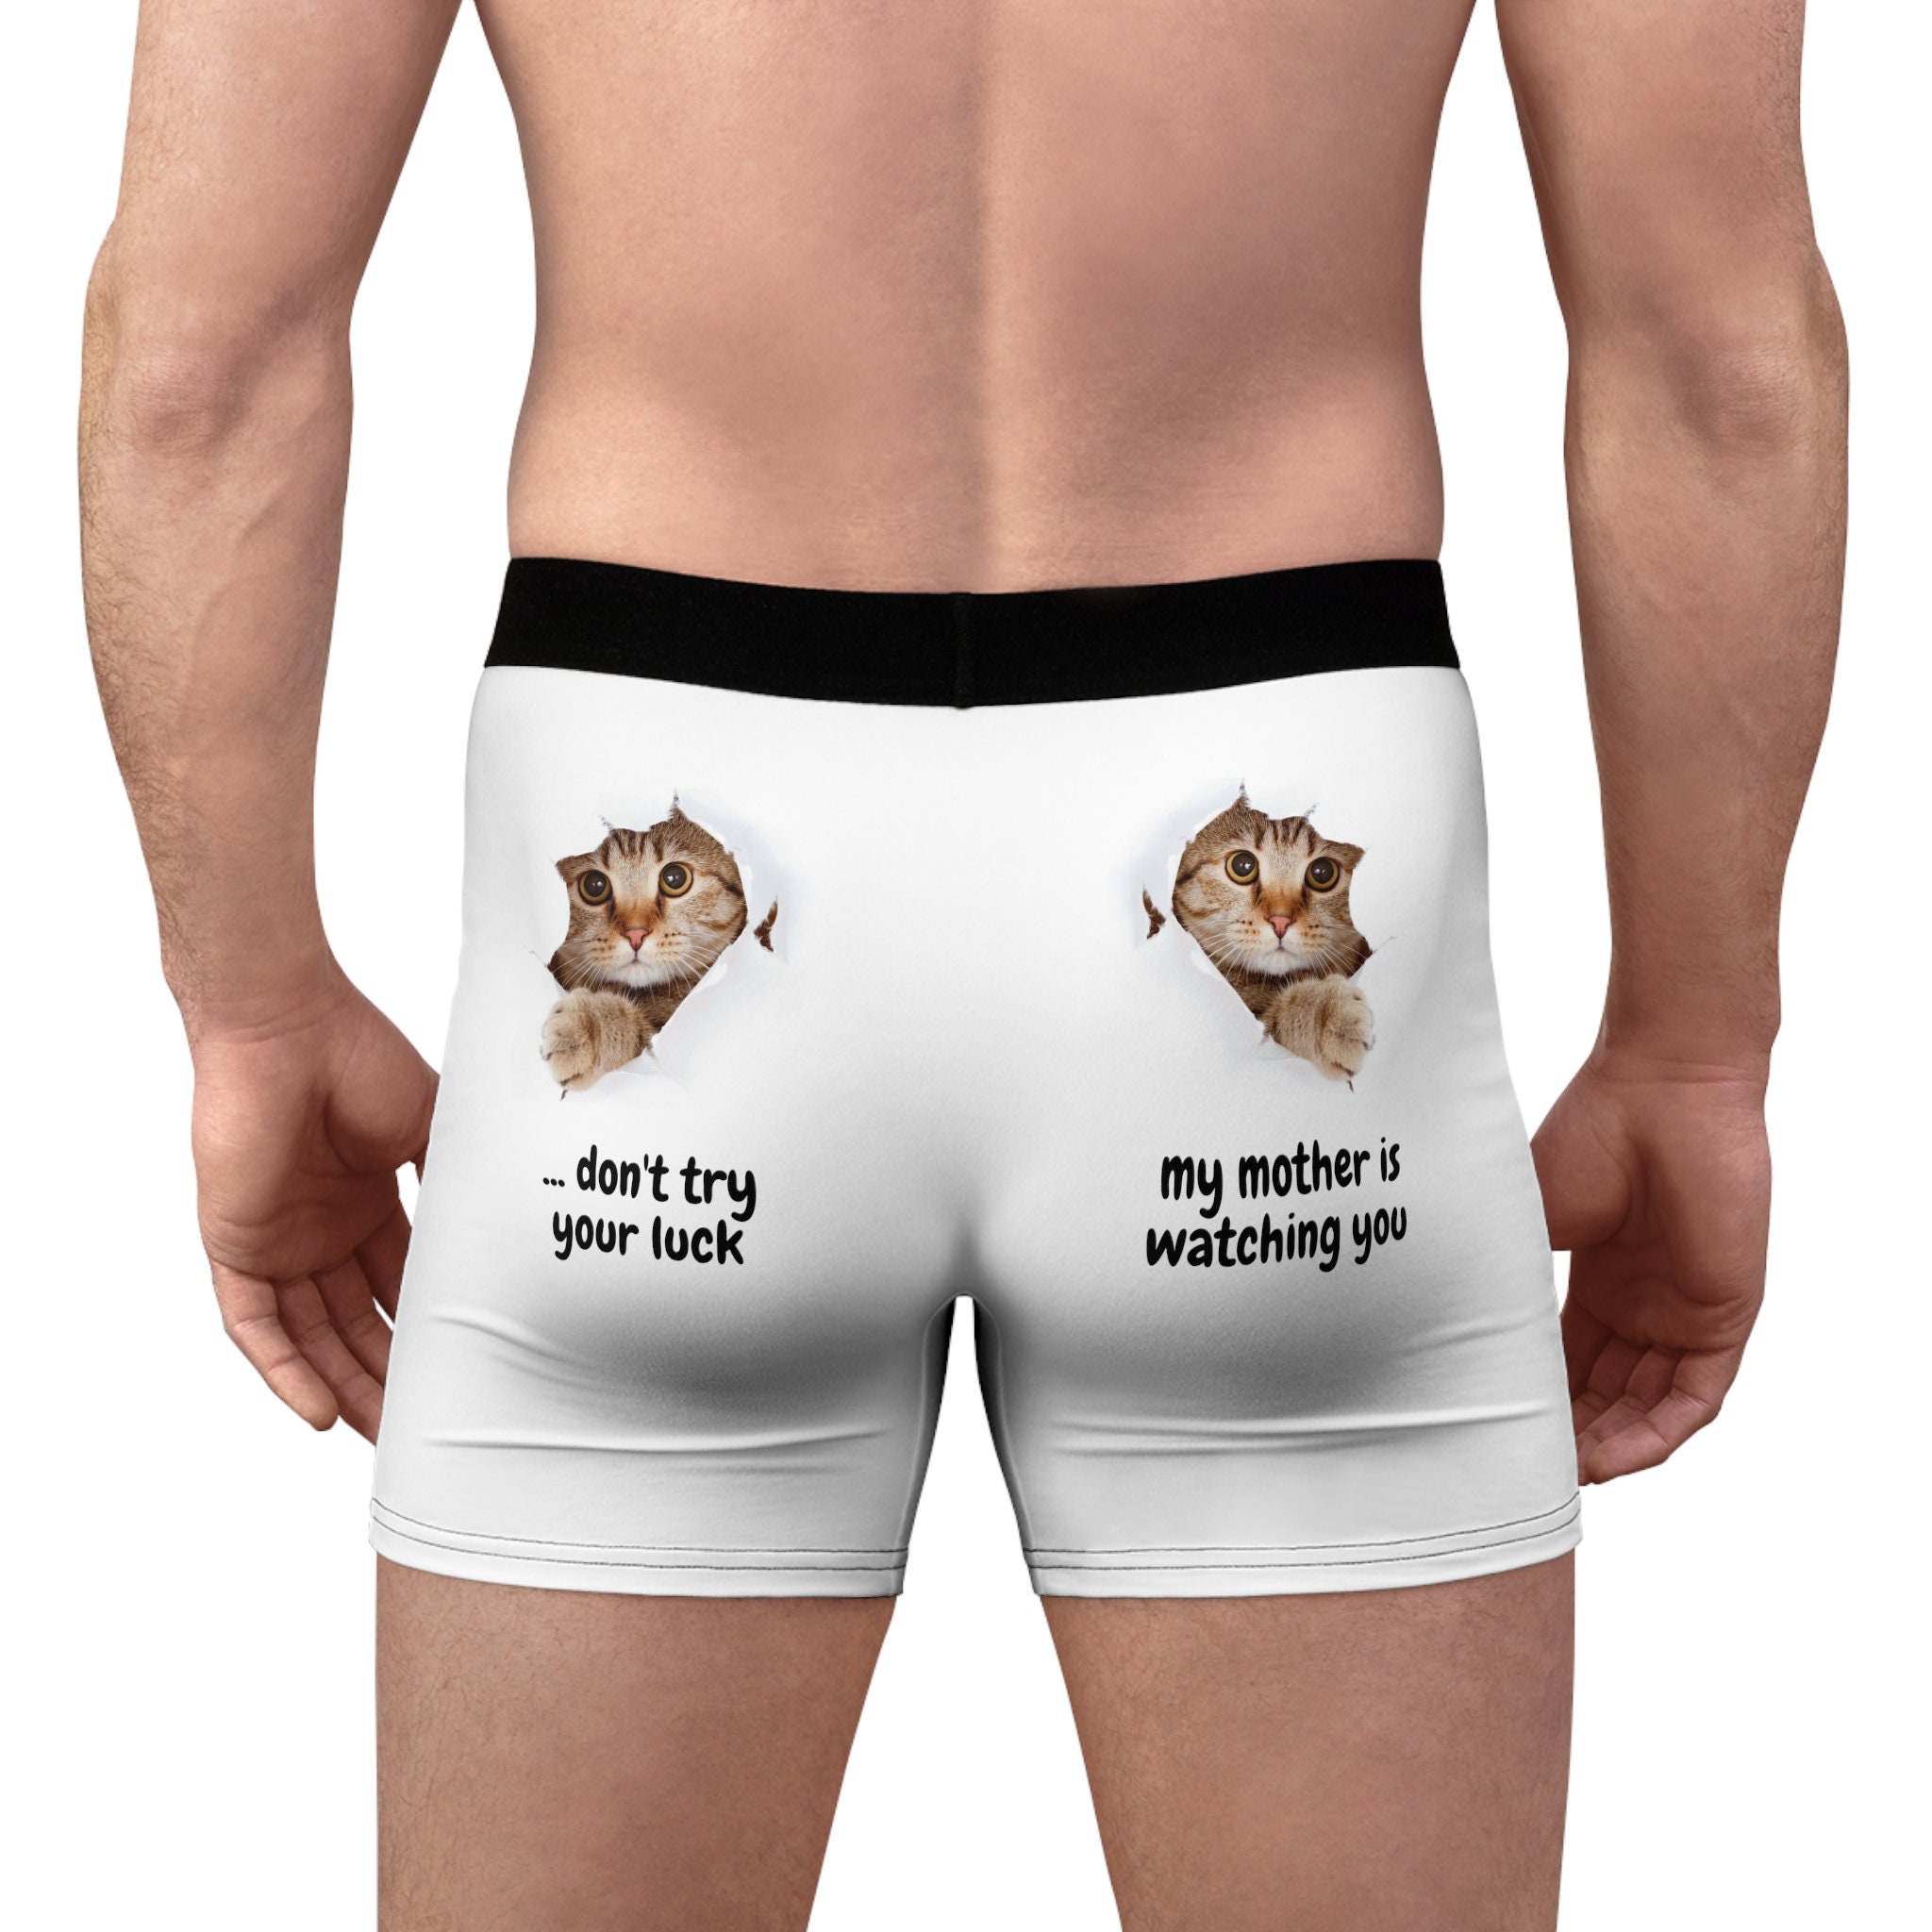 Humorous Men's Boxers, Funny Gift for Him